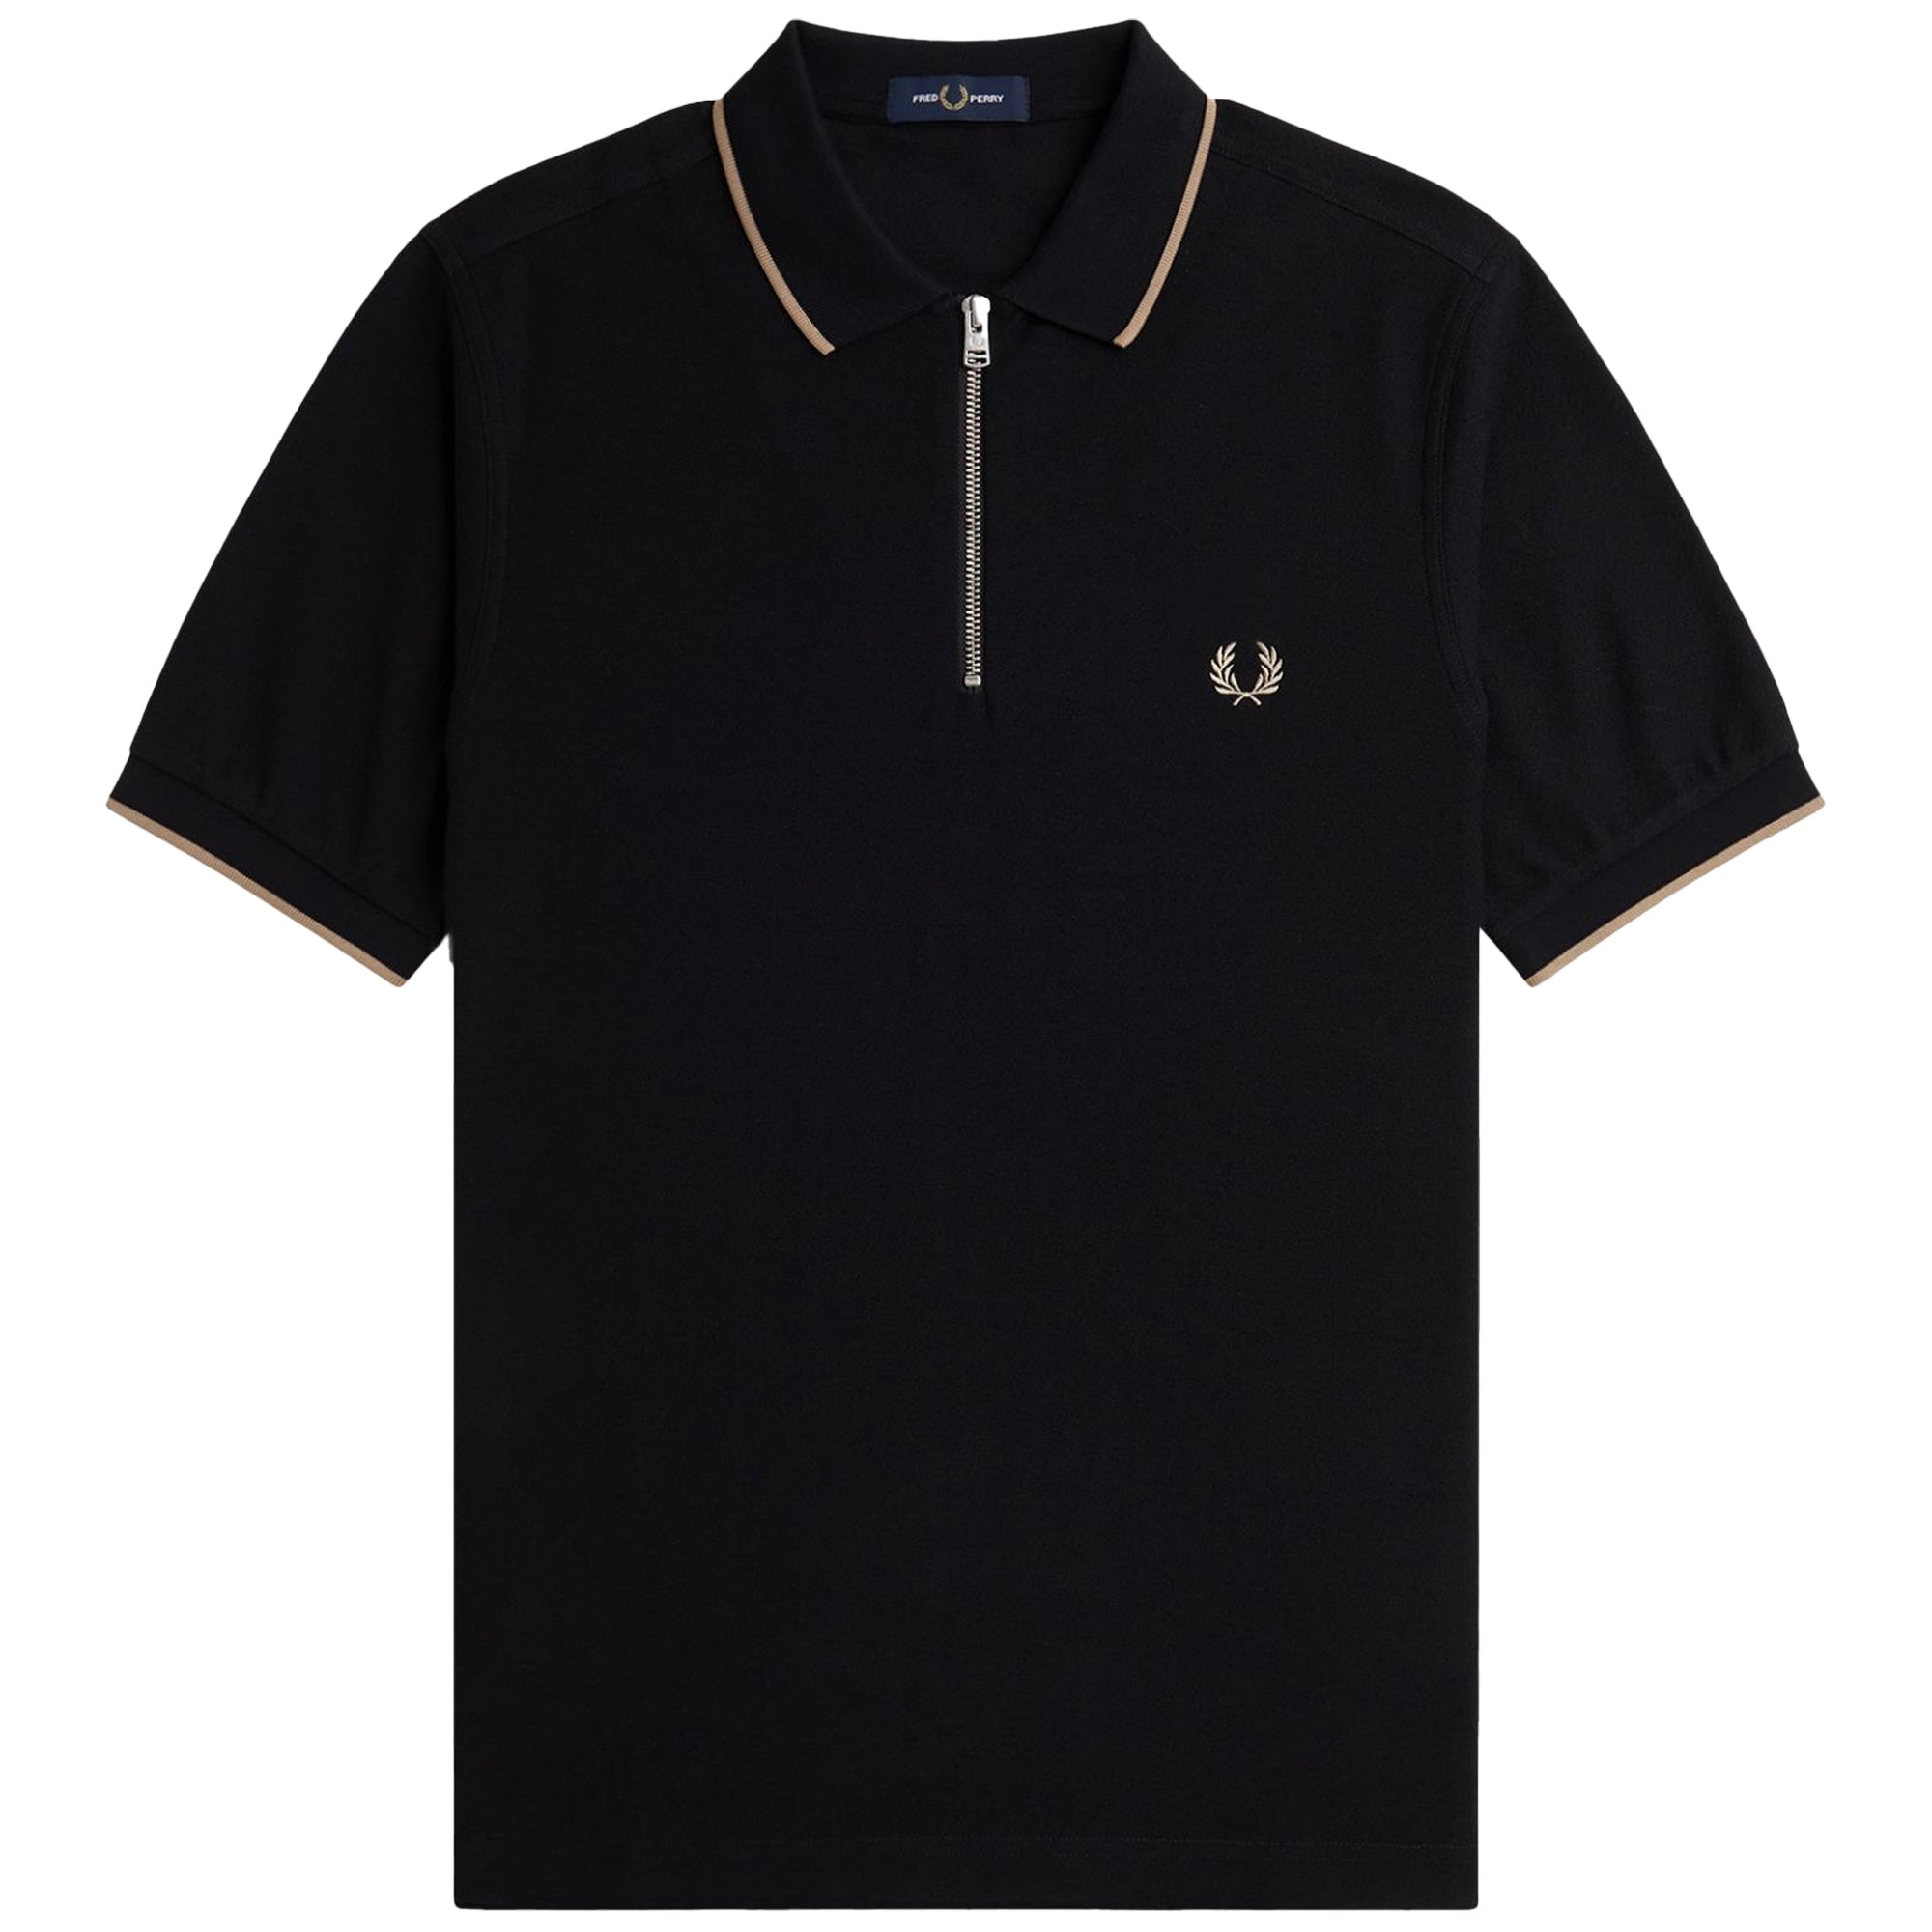 Fred Perry Crepe Pique Zip Neck Polo - Black